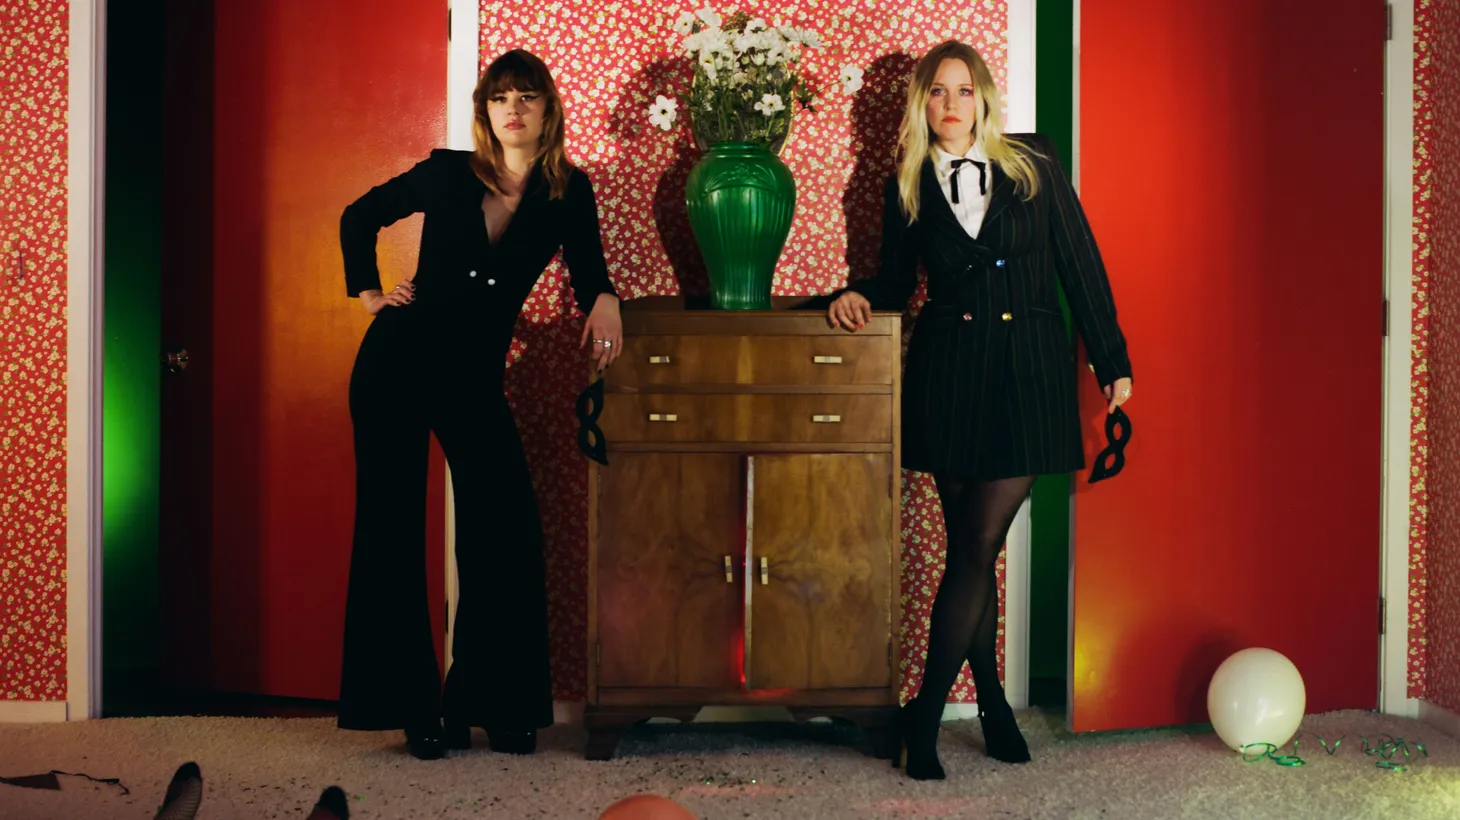 Sisters Jennifer and Jessica Clavin formed Bleached in Los Angeles in 2011. They'll join us live to perform tracks from their latest record Don't You Think You've Had Enough?